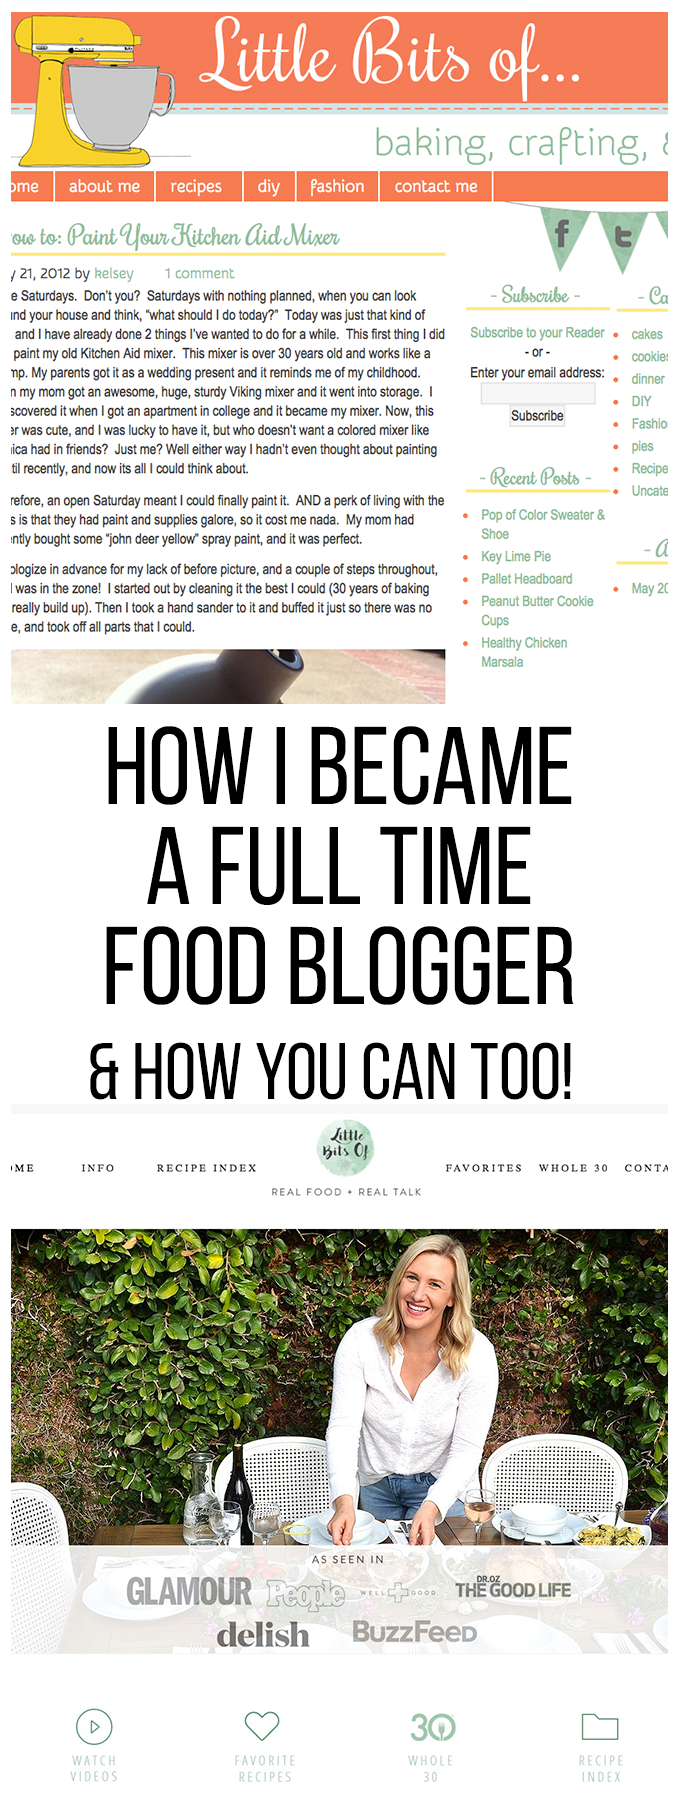 How to become a full time food blogger - my 5 year journey to have the career of my dreams!